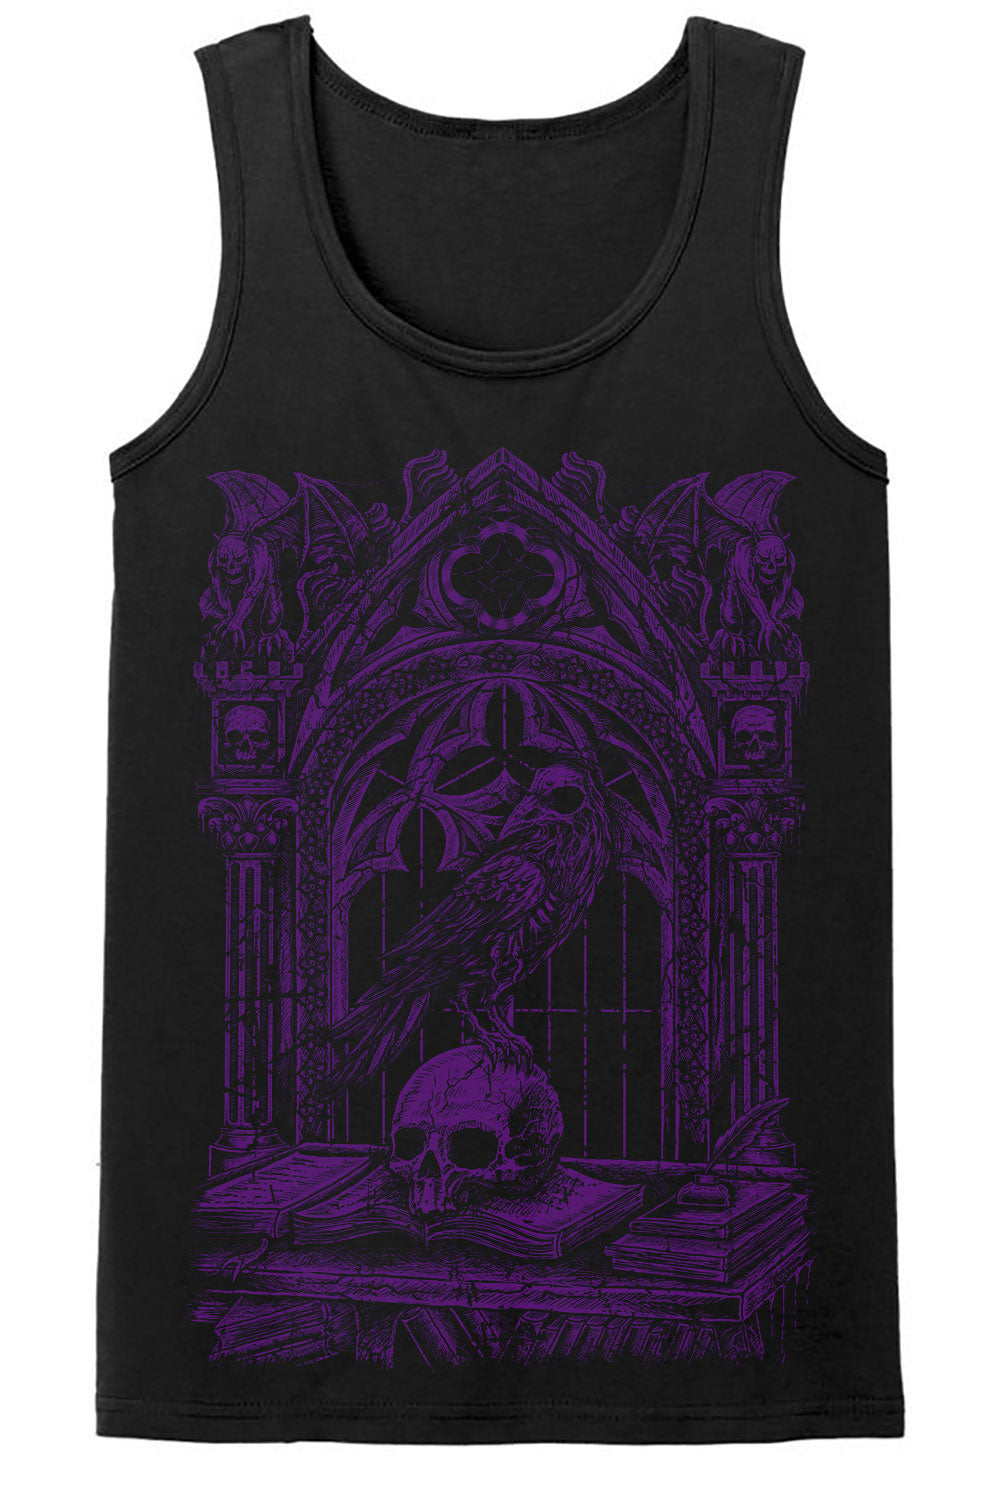 Quoth the Raven Tee [PURPLE] [Multiple Styles Available]